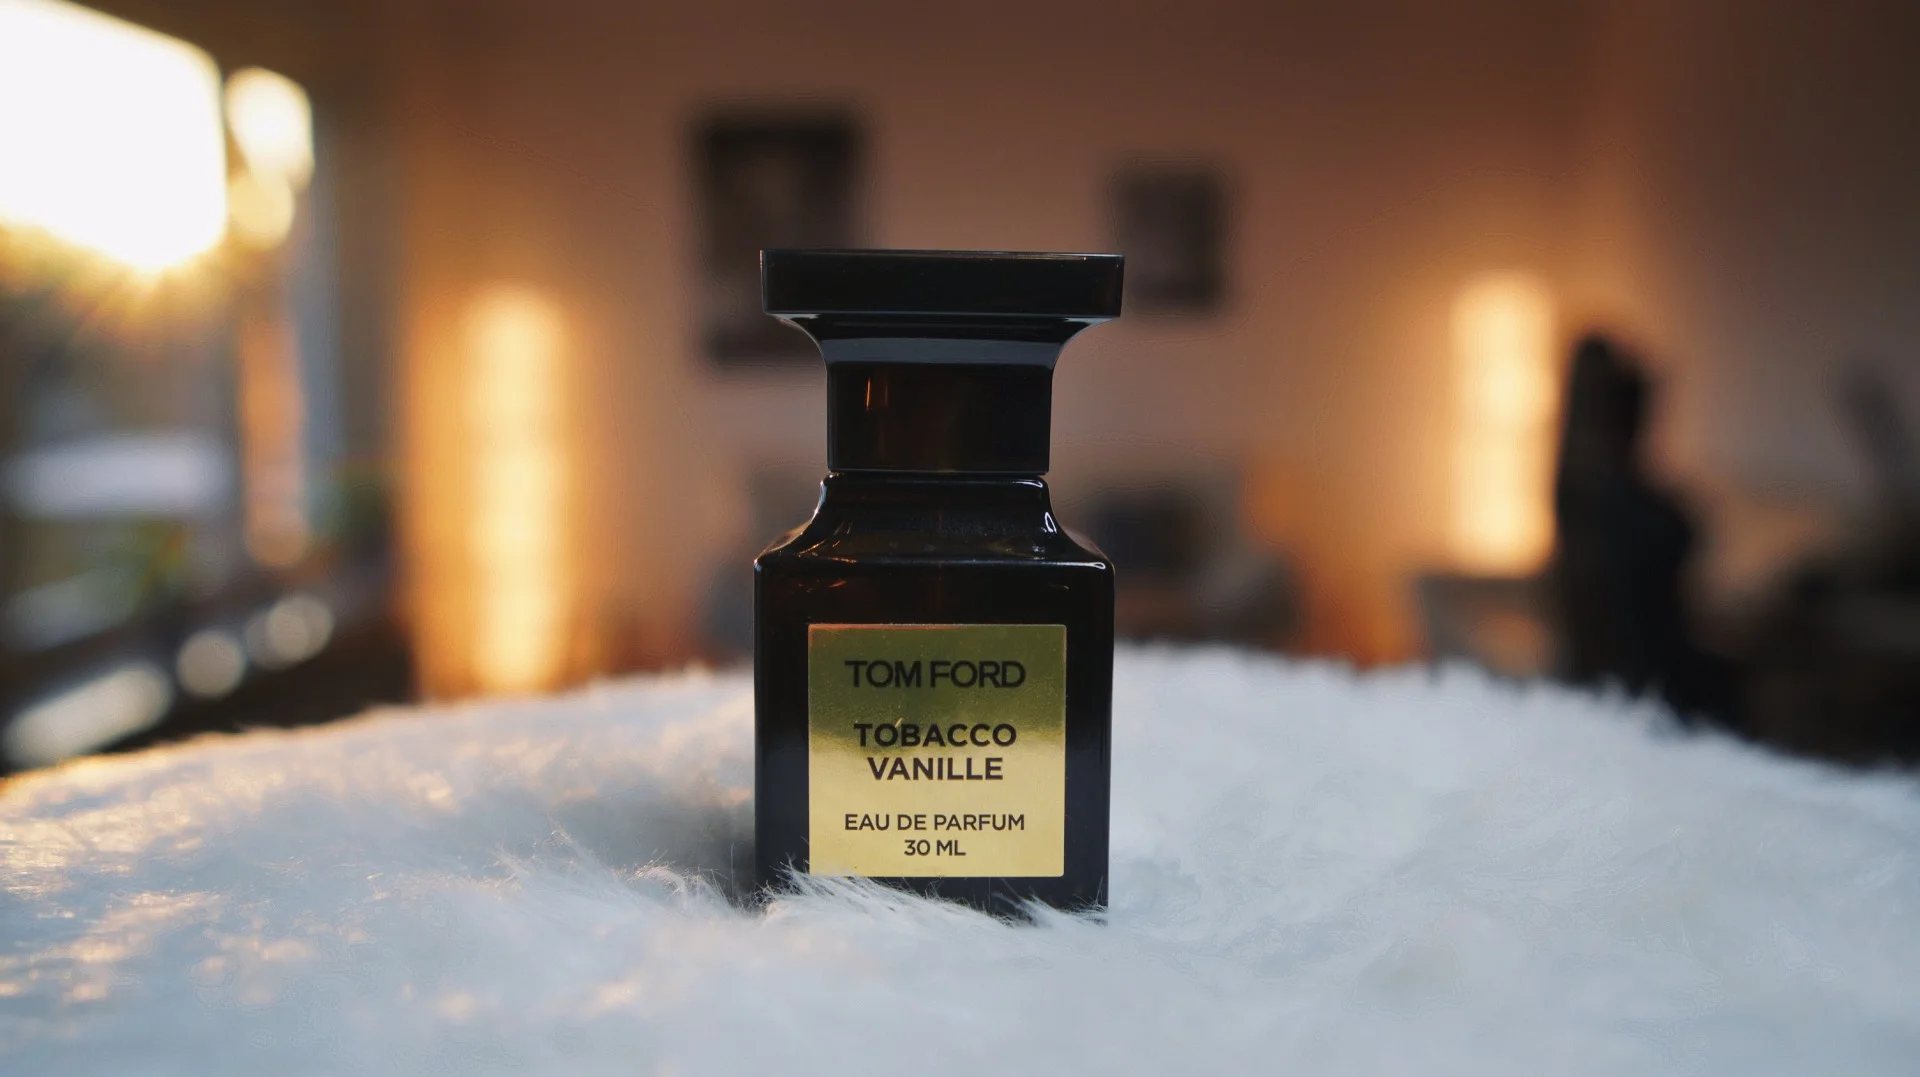 Tobacco Vanille (Tom Ford) - Review